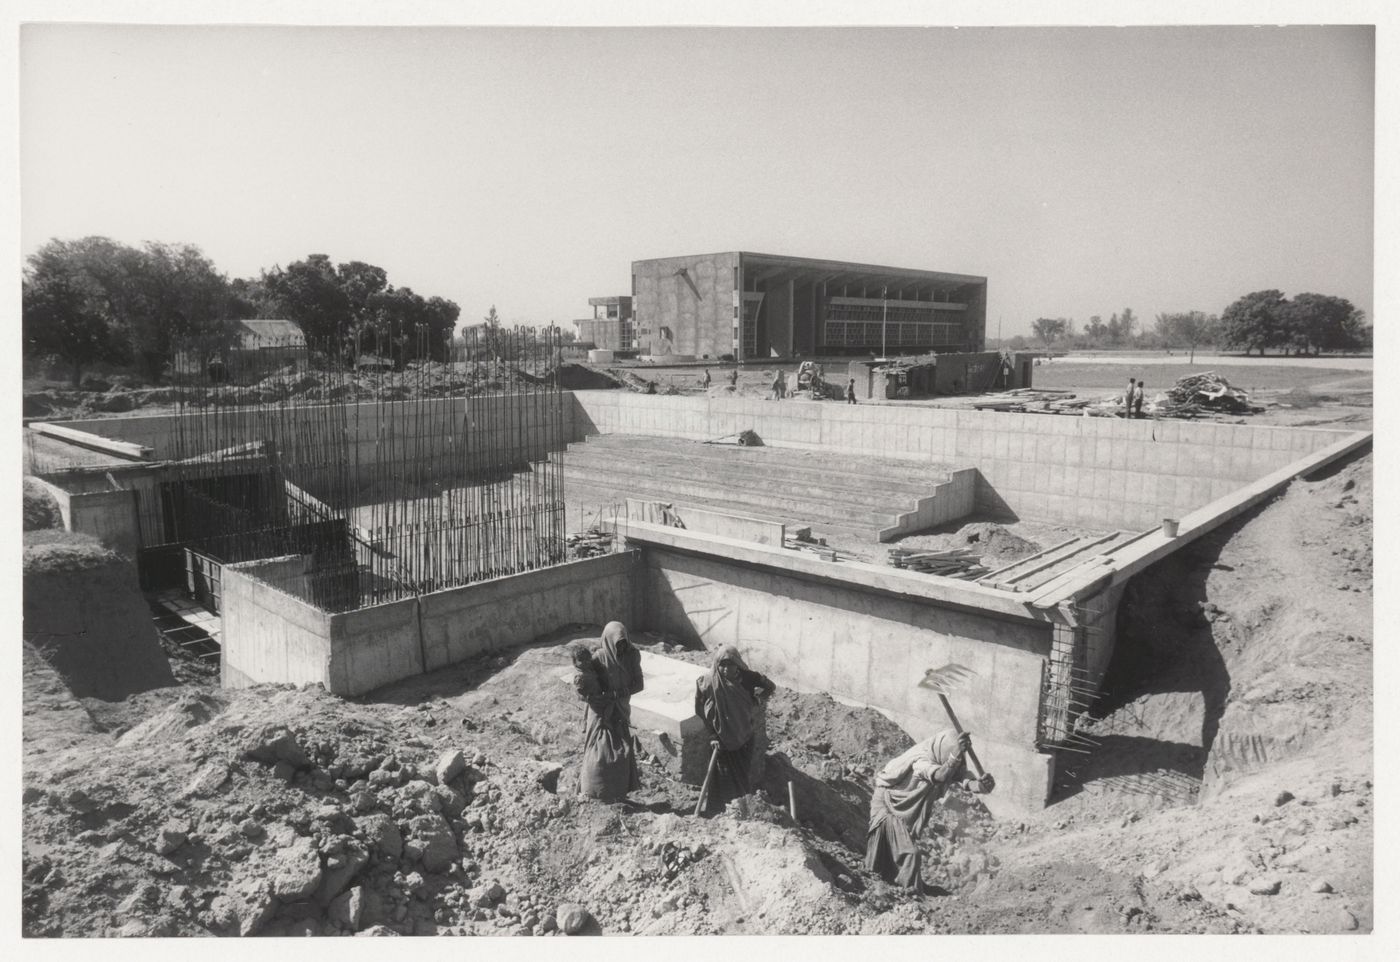 View of the Trench of Consideration under construction, Capitol Complex, Sector 1, Chandigarh, India